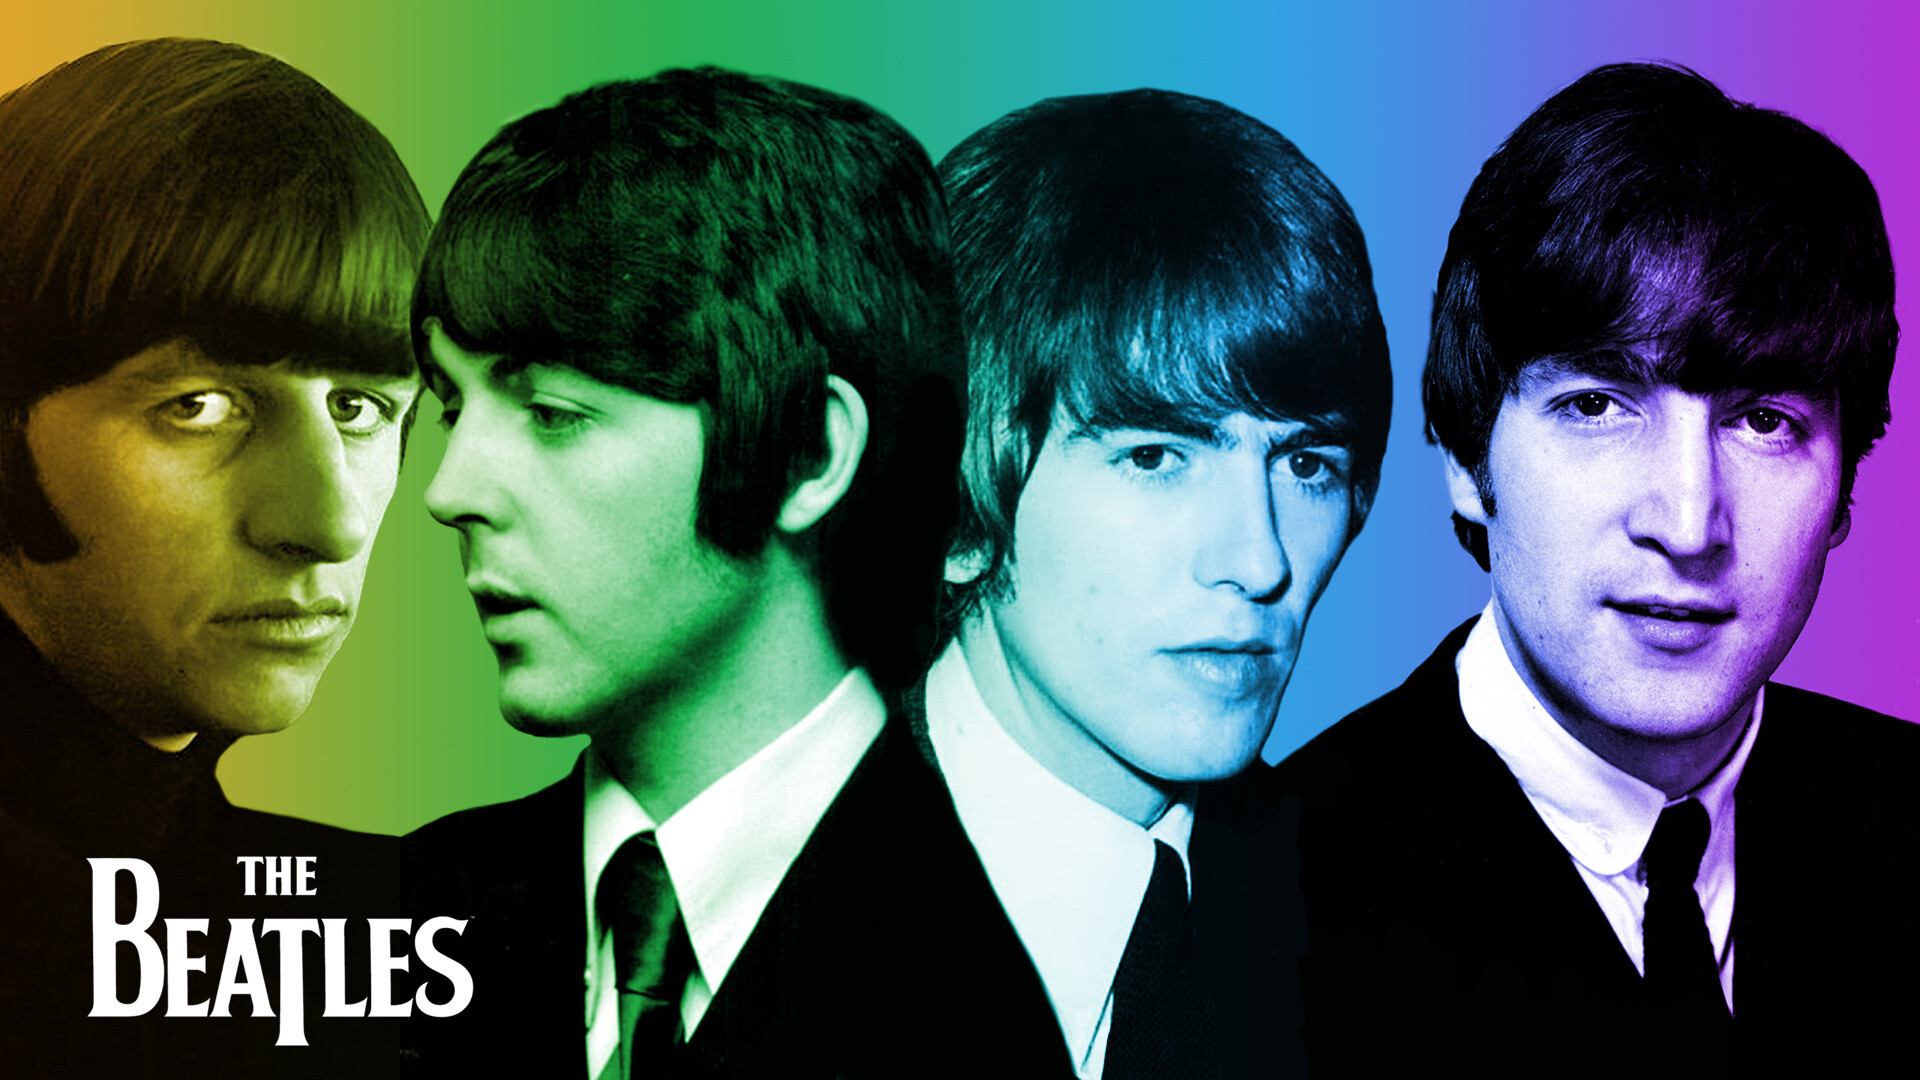 The Beatles: The band became the first rock group to be nominated for a Grammy Award for Album of the Year. 1920x1080 Full HD Background.